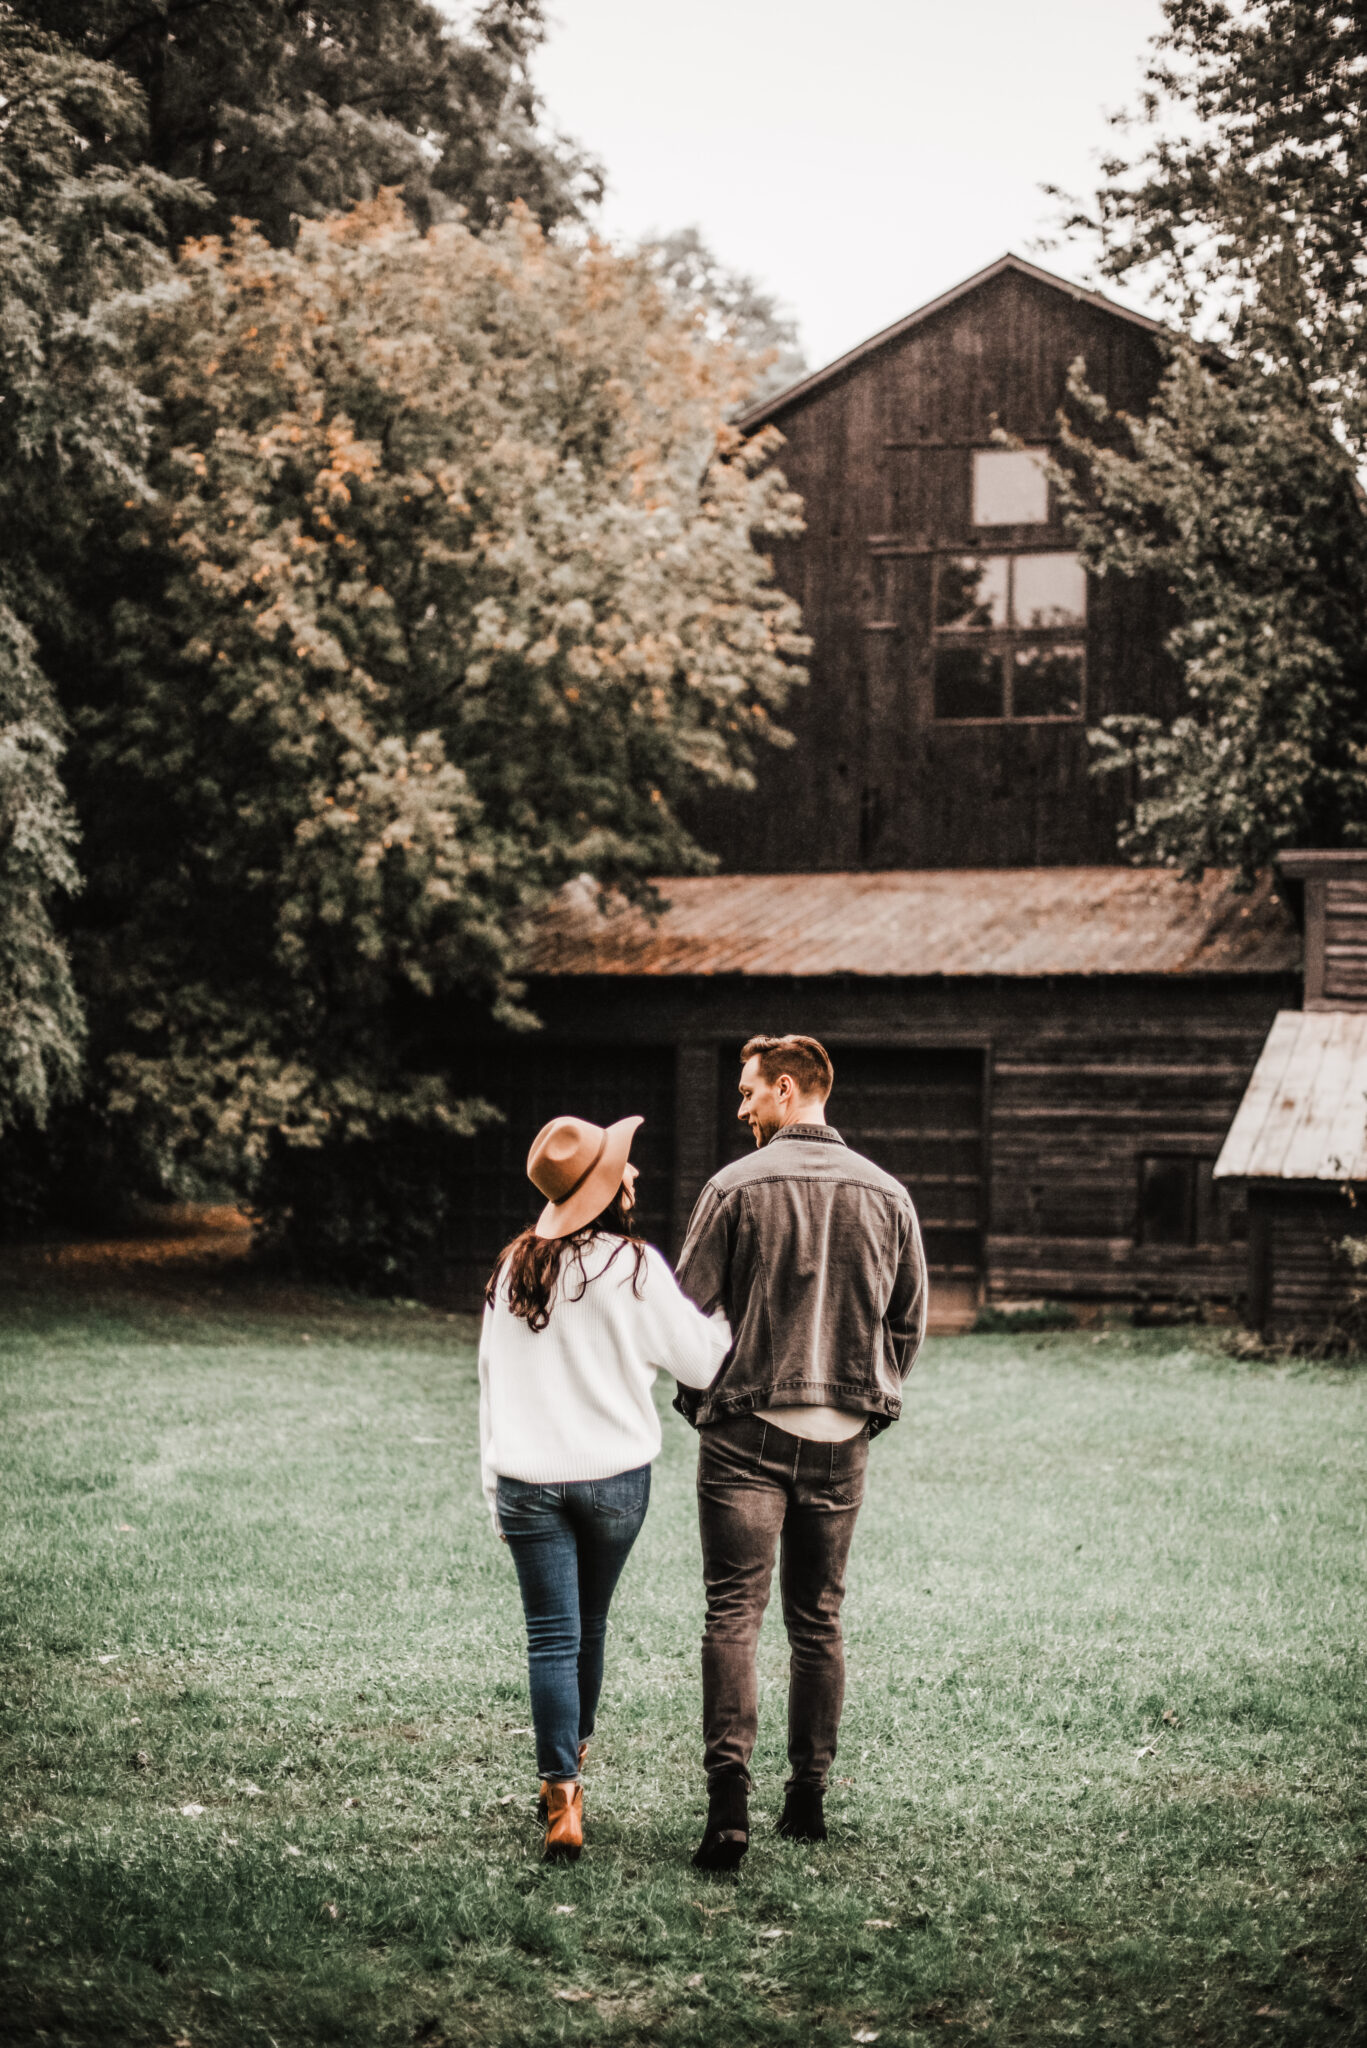 A couple walking towards their rural farmhouse. This article covers how to maximize the benefits of rural living.